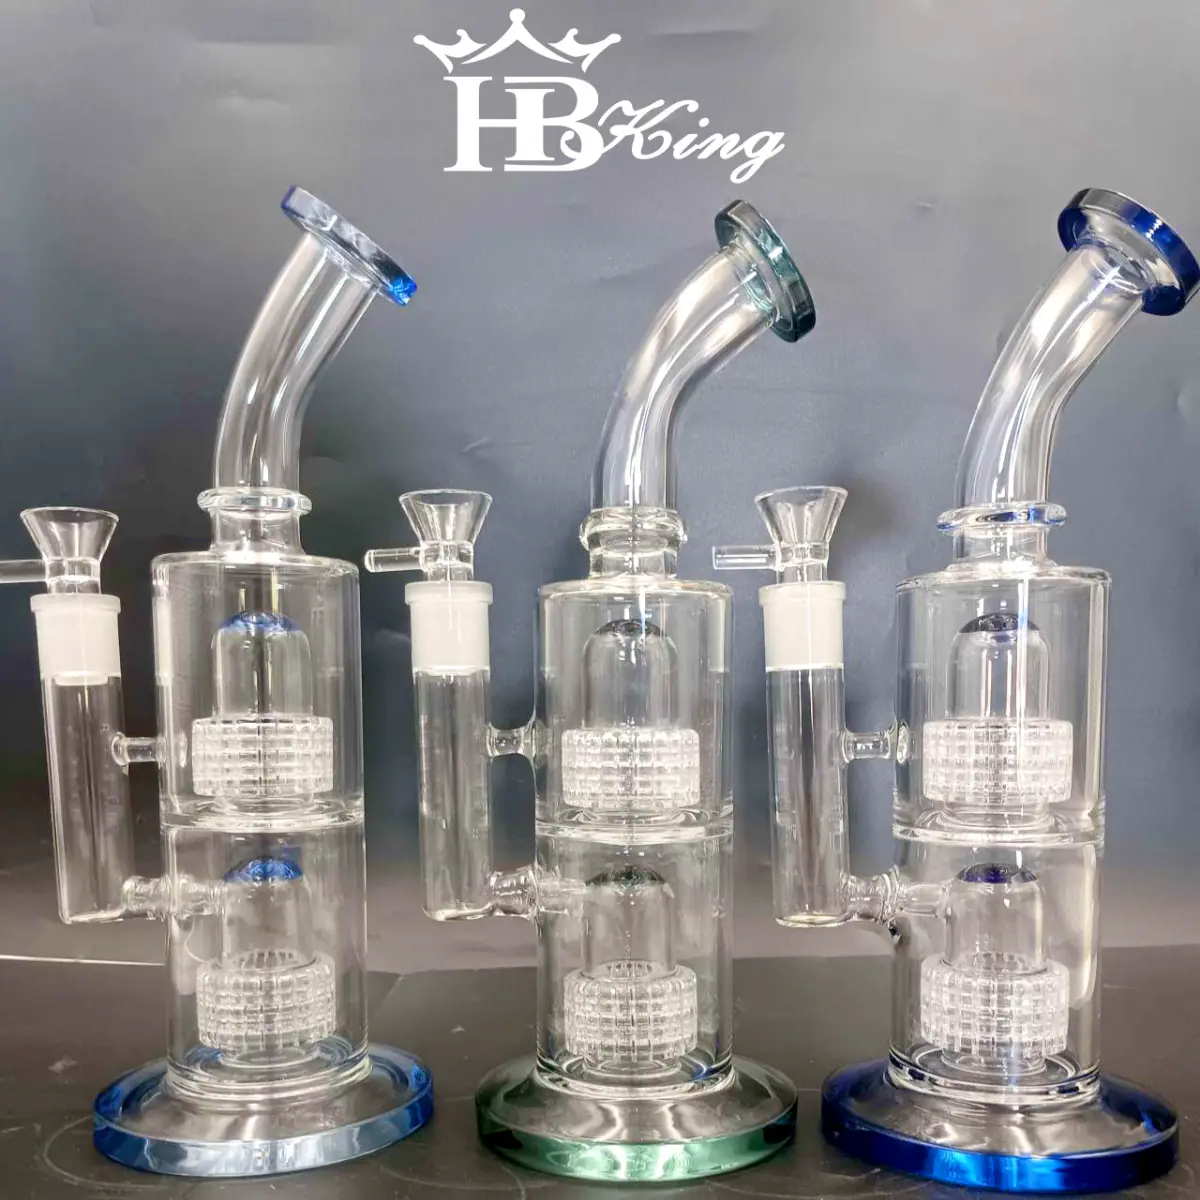 Three Double Showerhead Percs in different colors